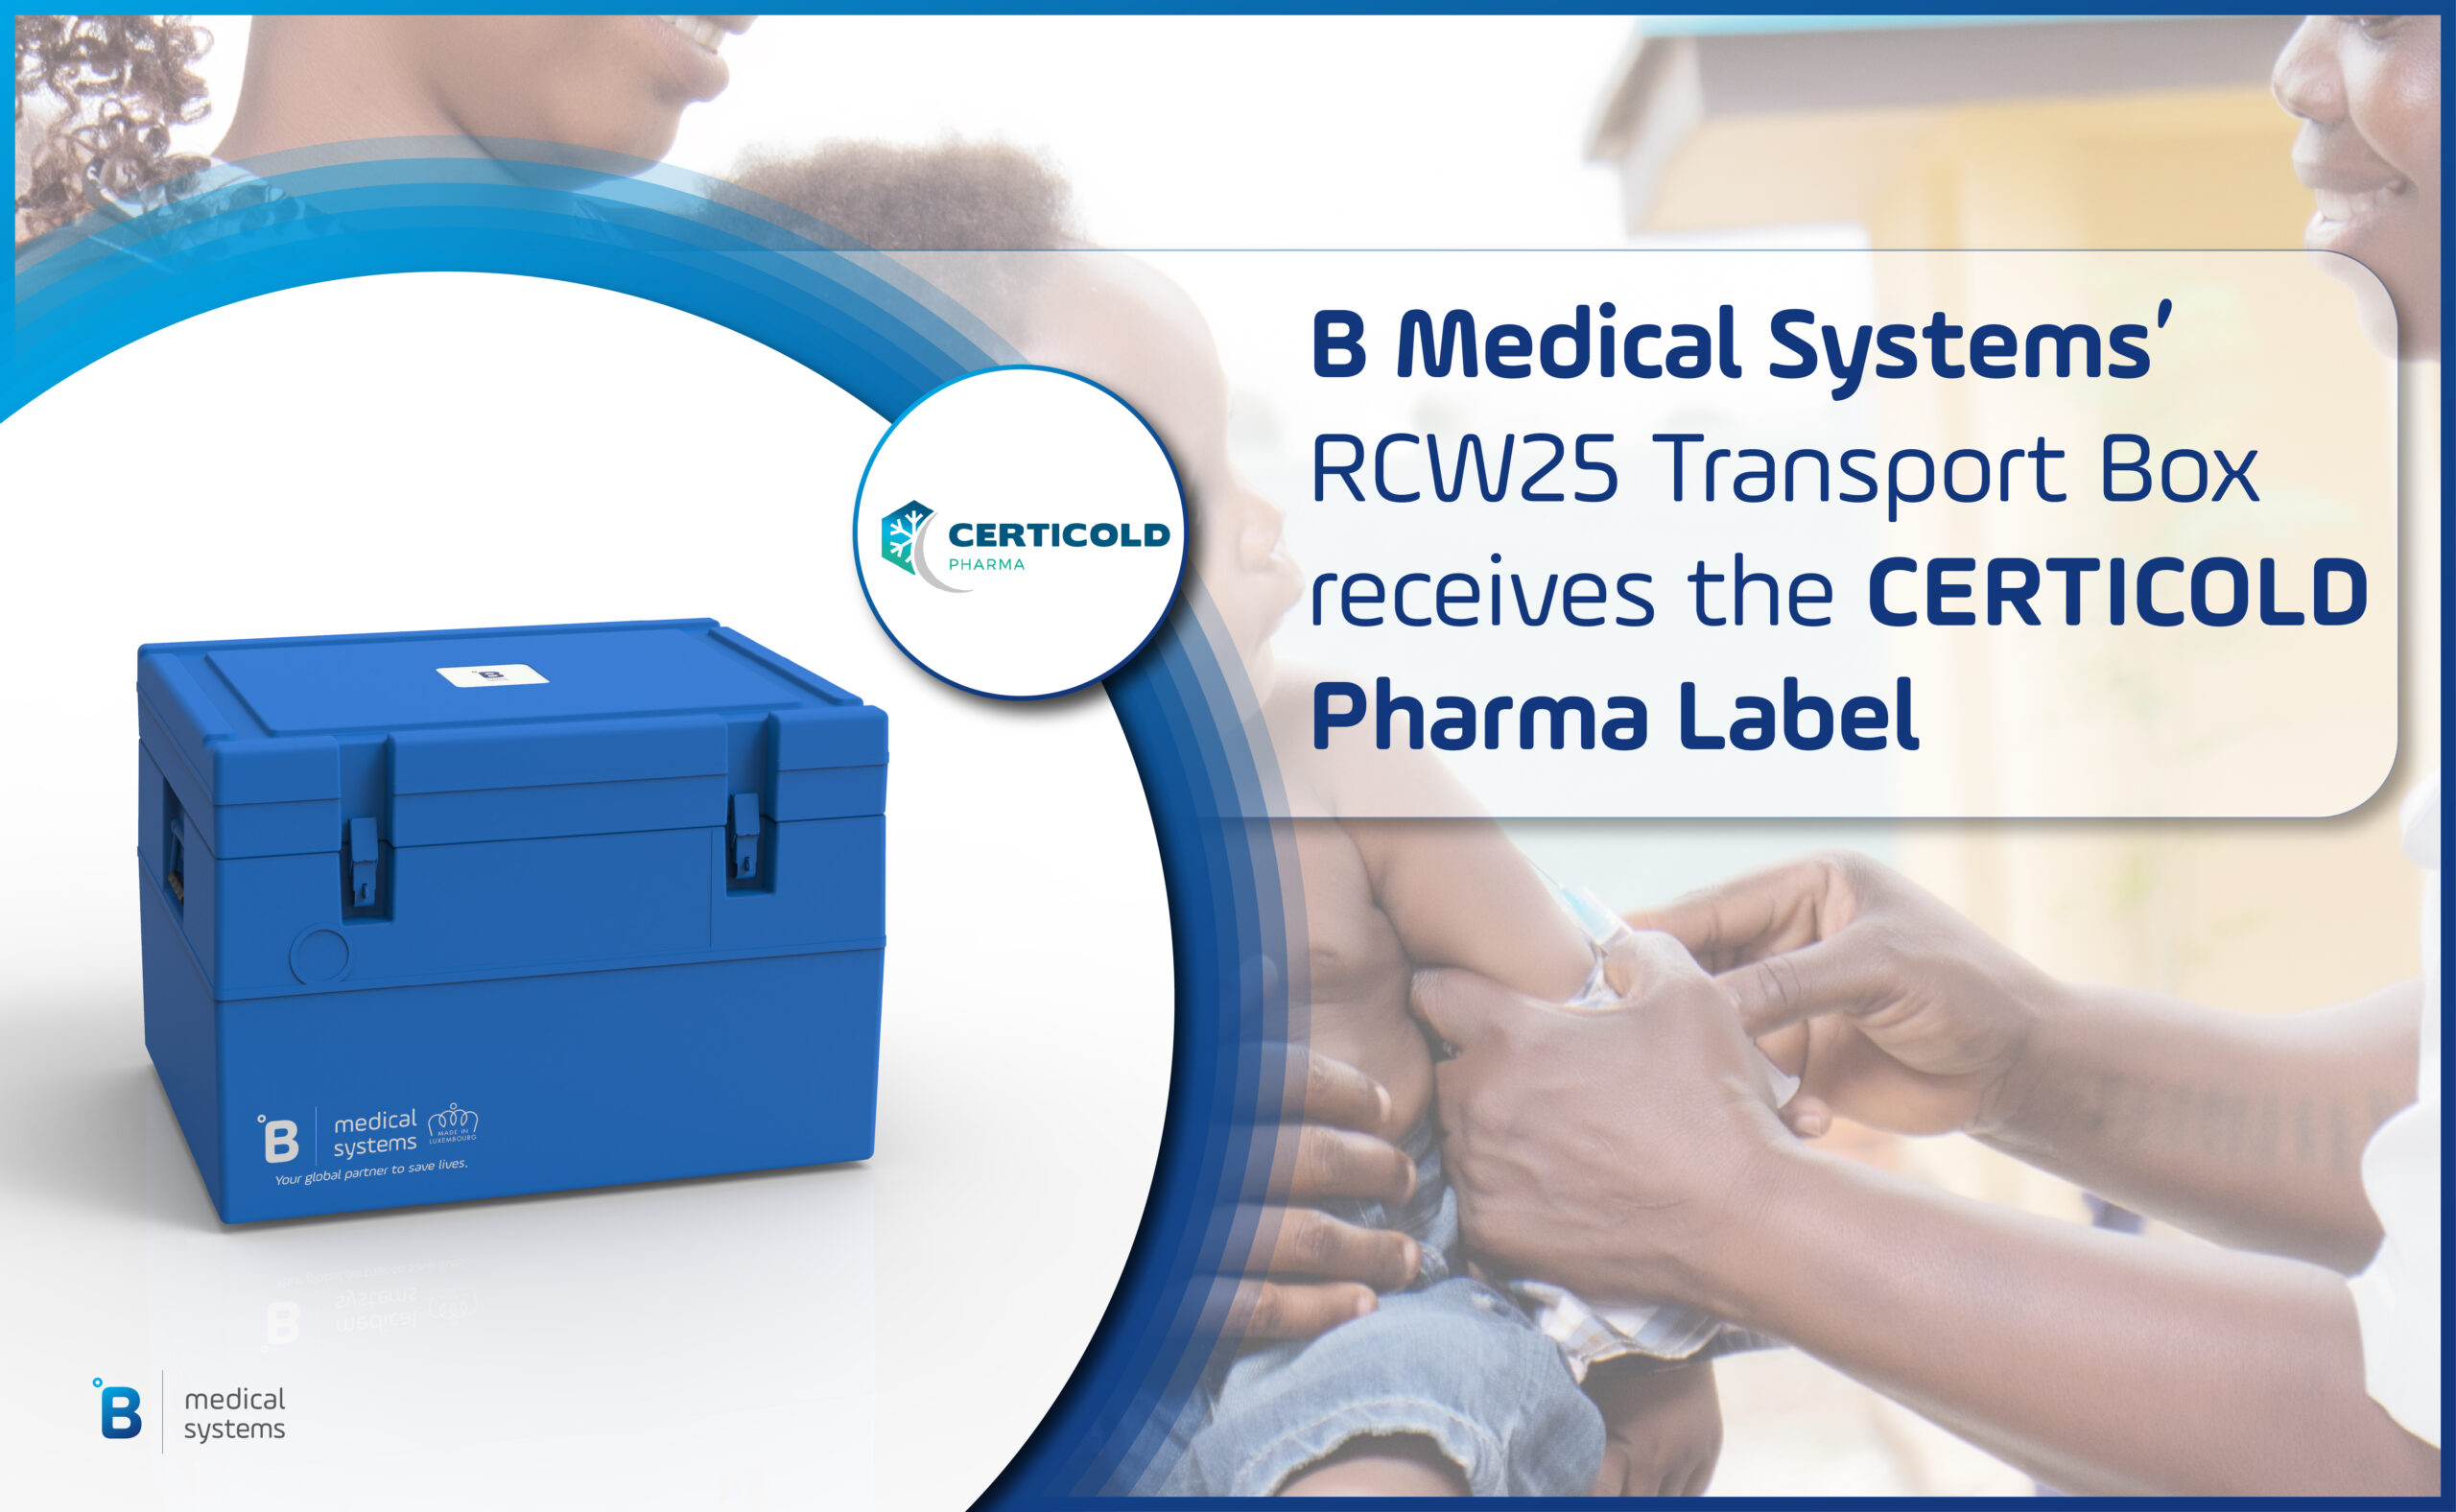 B Medical Systems’ RCW 25 Transport Box receives Certicold Pharma Label